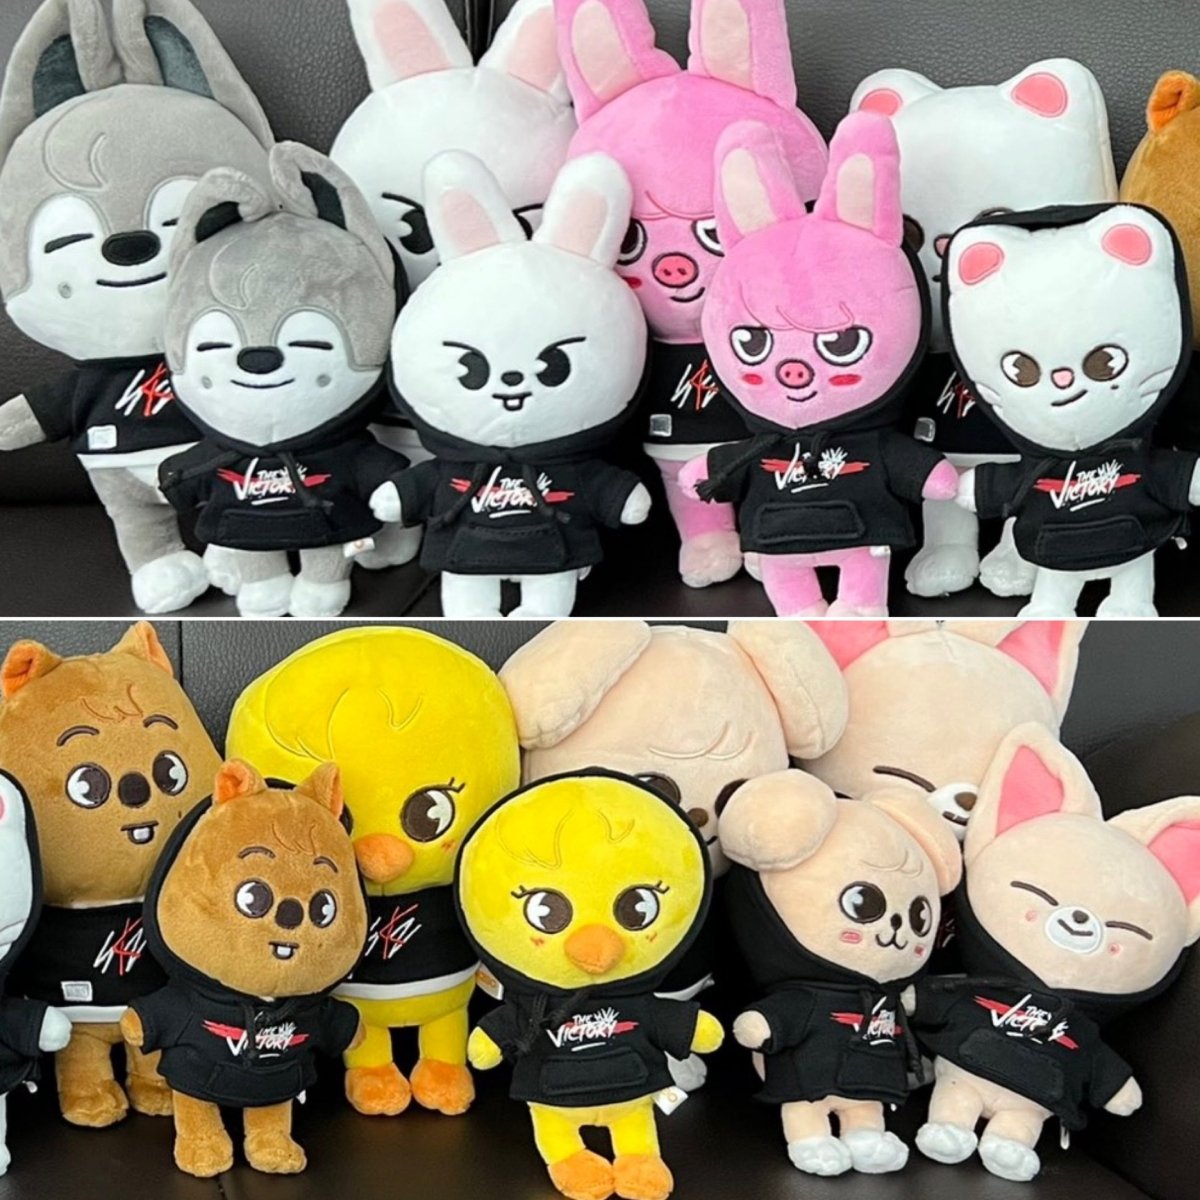 STRAY KIDS x SKZOO Official Original and Mini Plush Doll